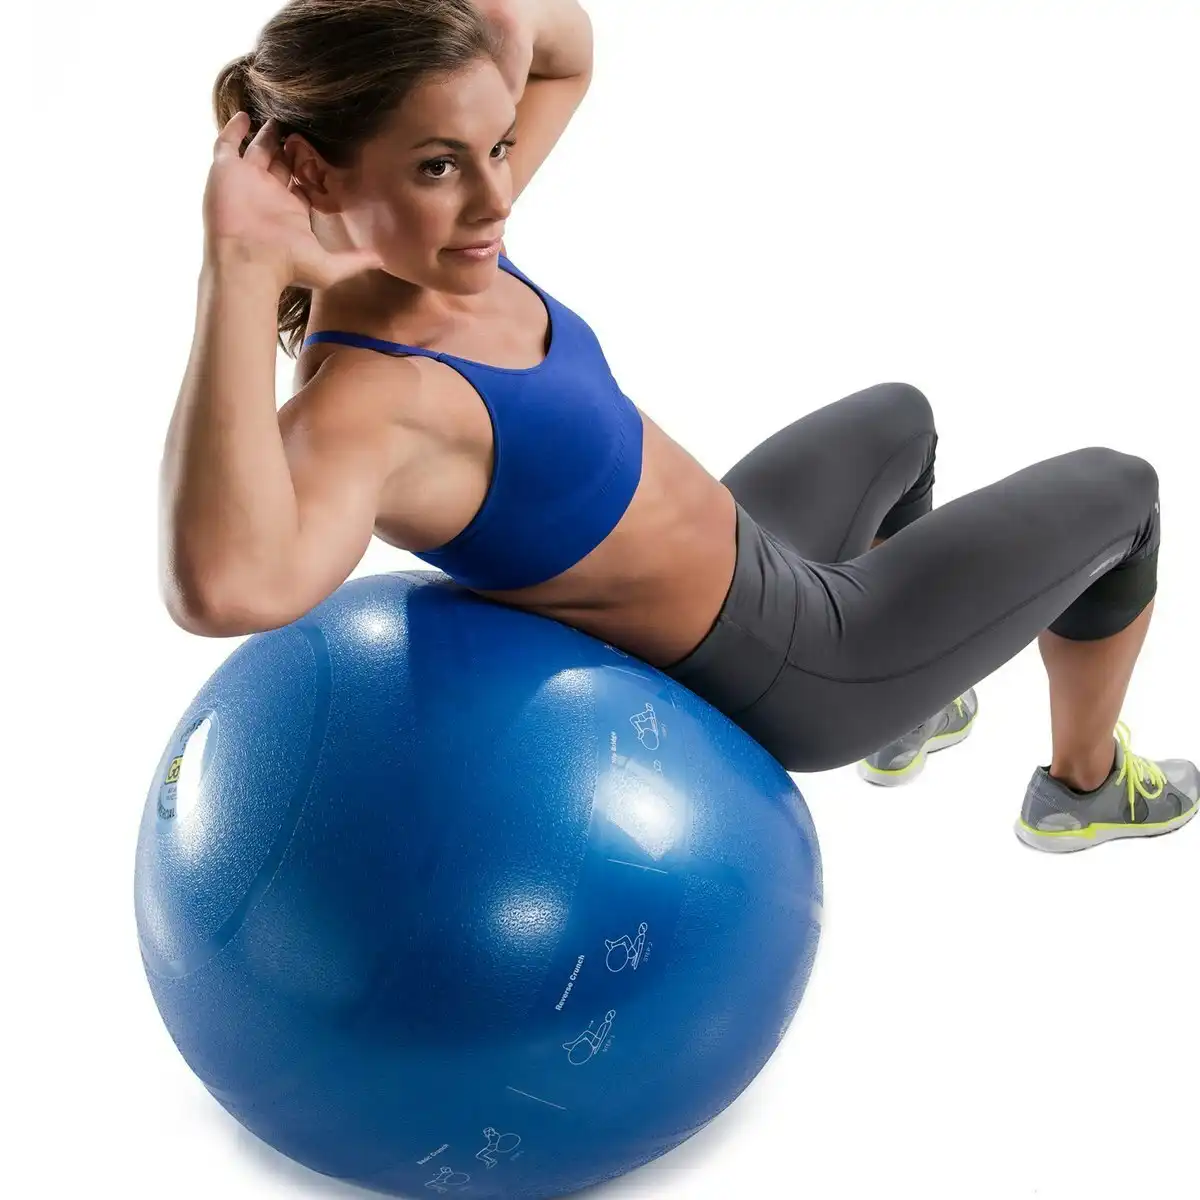 Gofit 55cm Proball Sports Gym Exercise Fitness/Yoga Training Stability Ball Blue